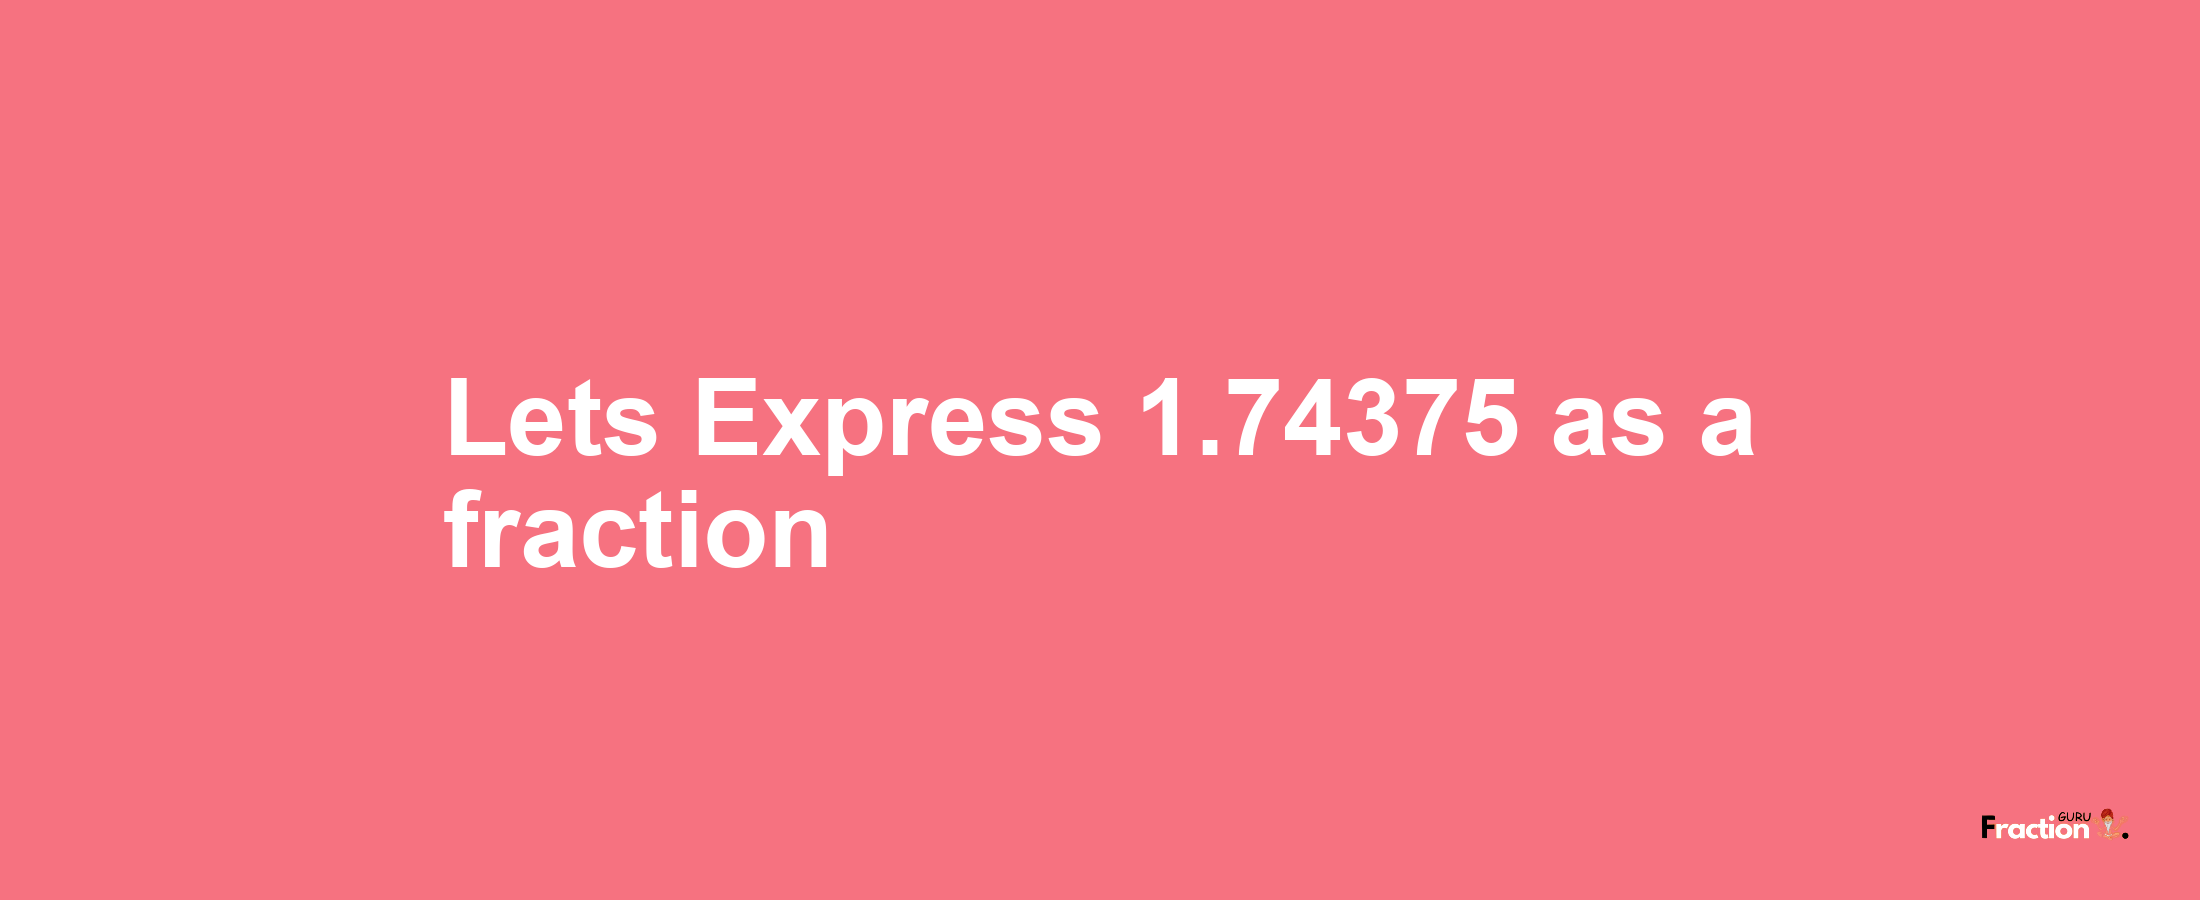 Lets Express 1.74375 as afraction